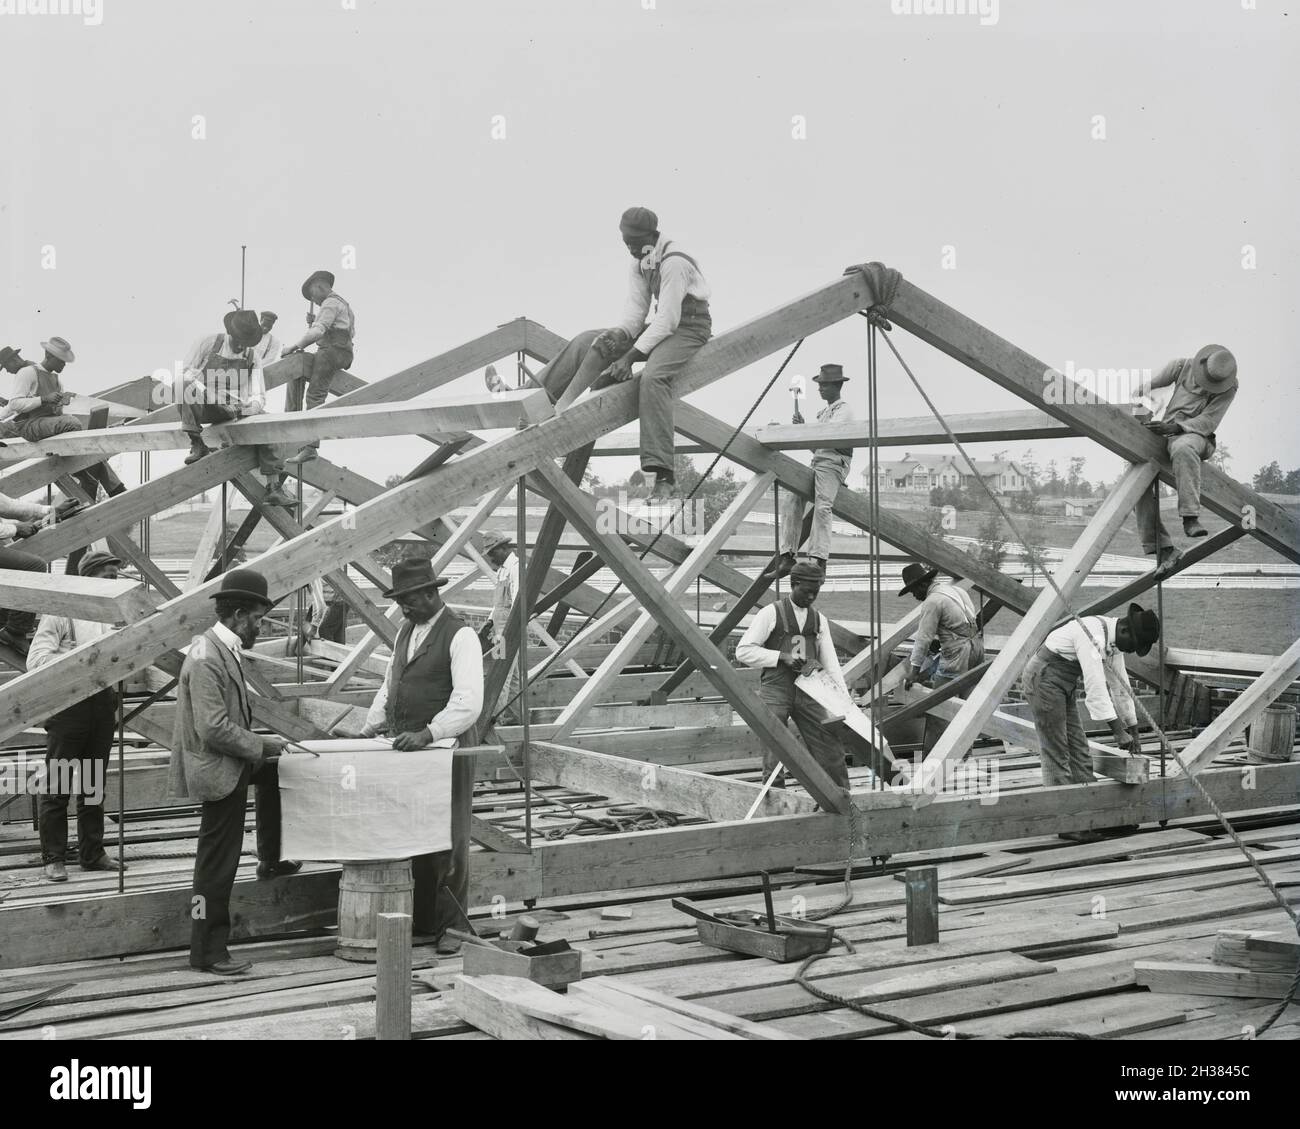 Frances Benjamin Johnston vintage photography - Roof Construction by the students at Tuskegee Institute - circa 1902 Stock Photo